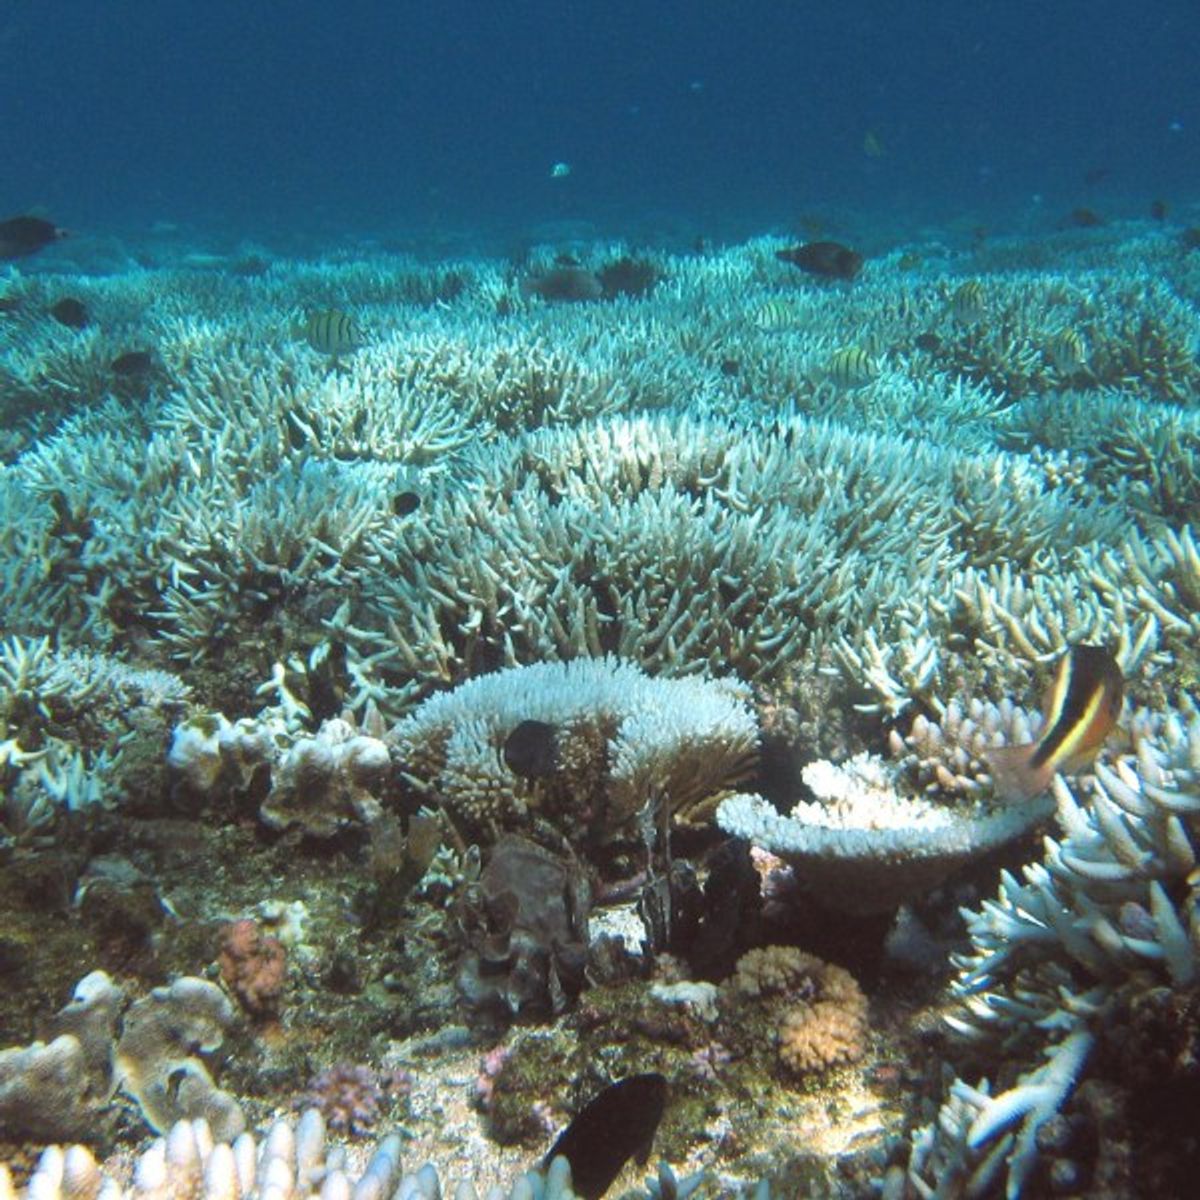 The Great Barrier Reef Has NOT 'Passed Away'